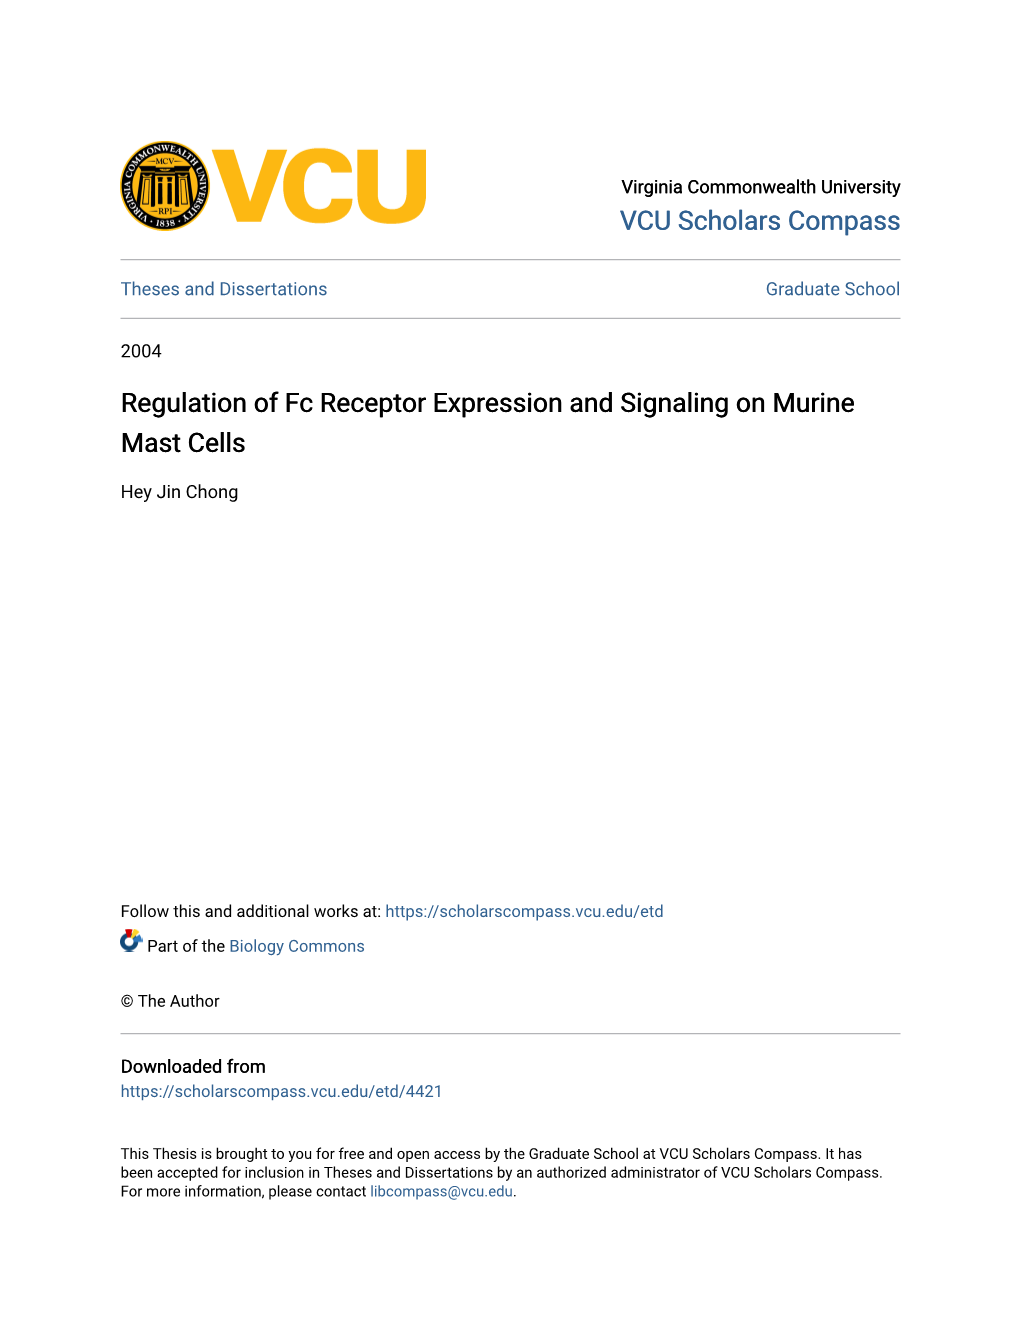 Regulation of Fc Receptor Expression and Signaling on Murine Mast Cells